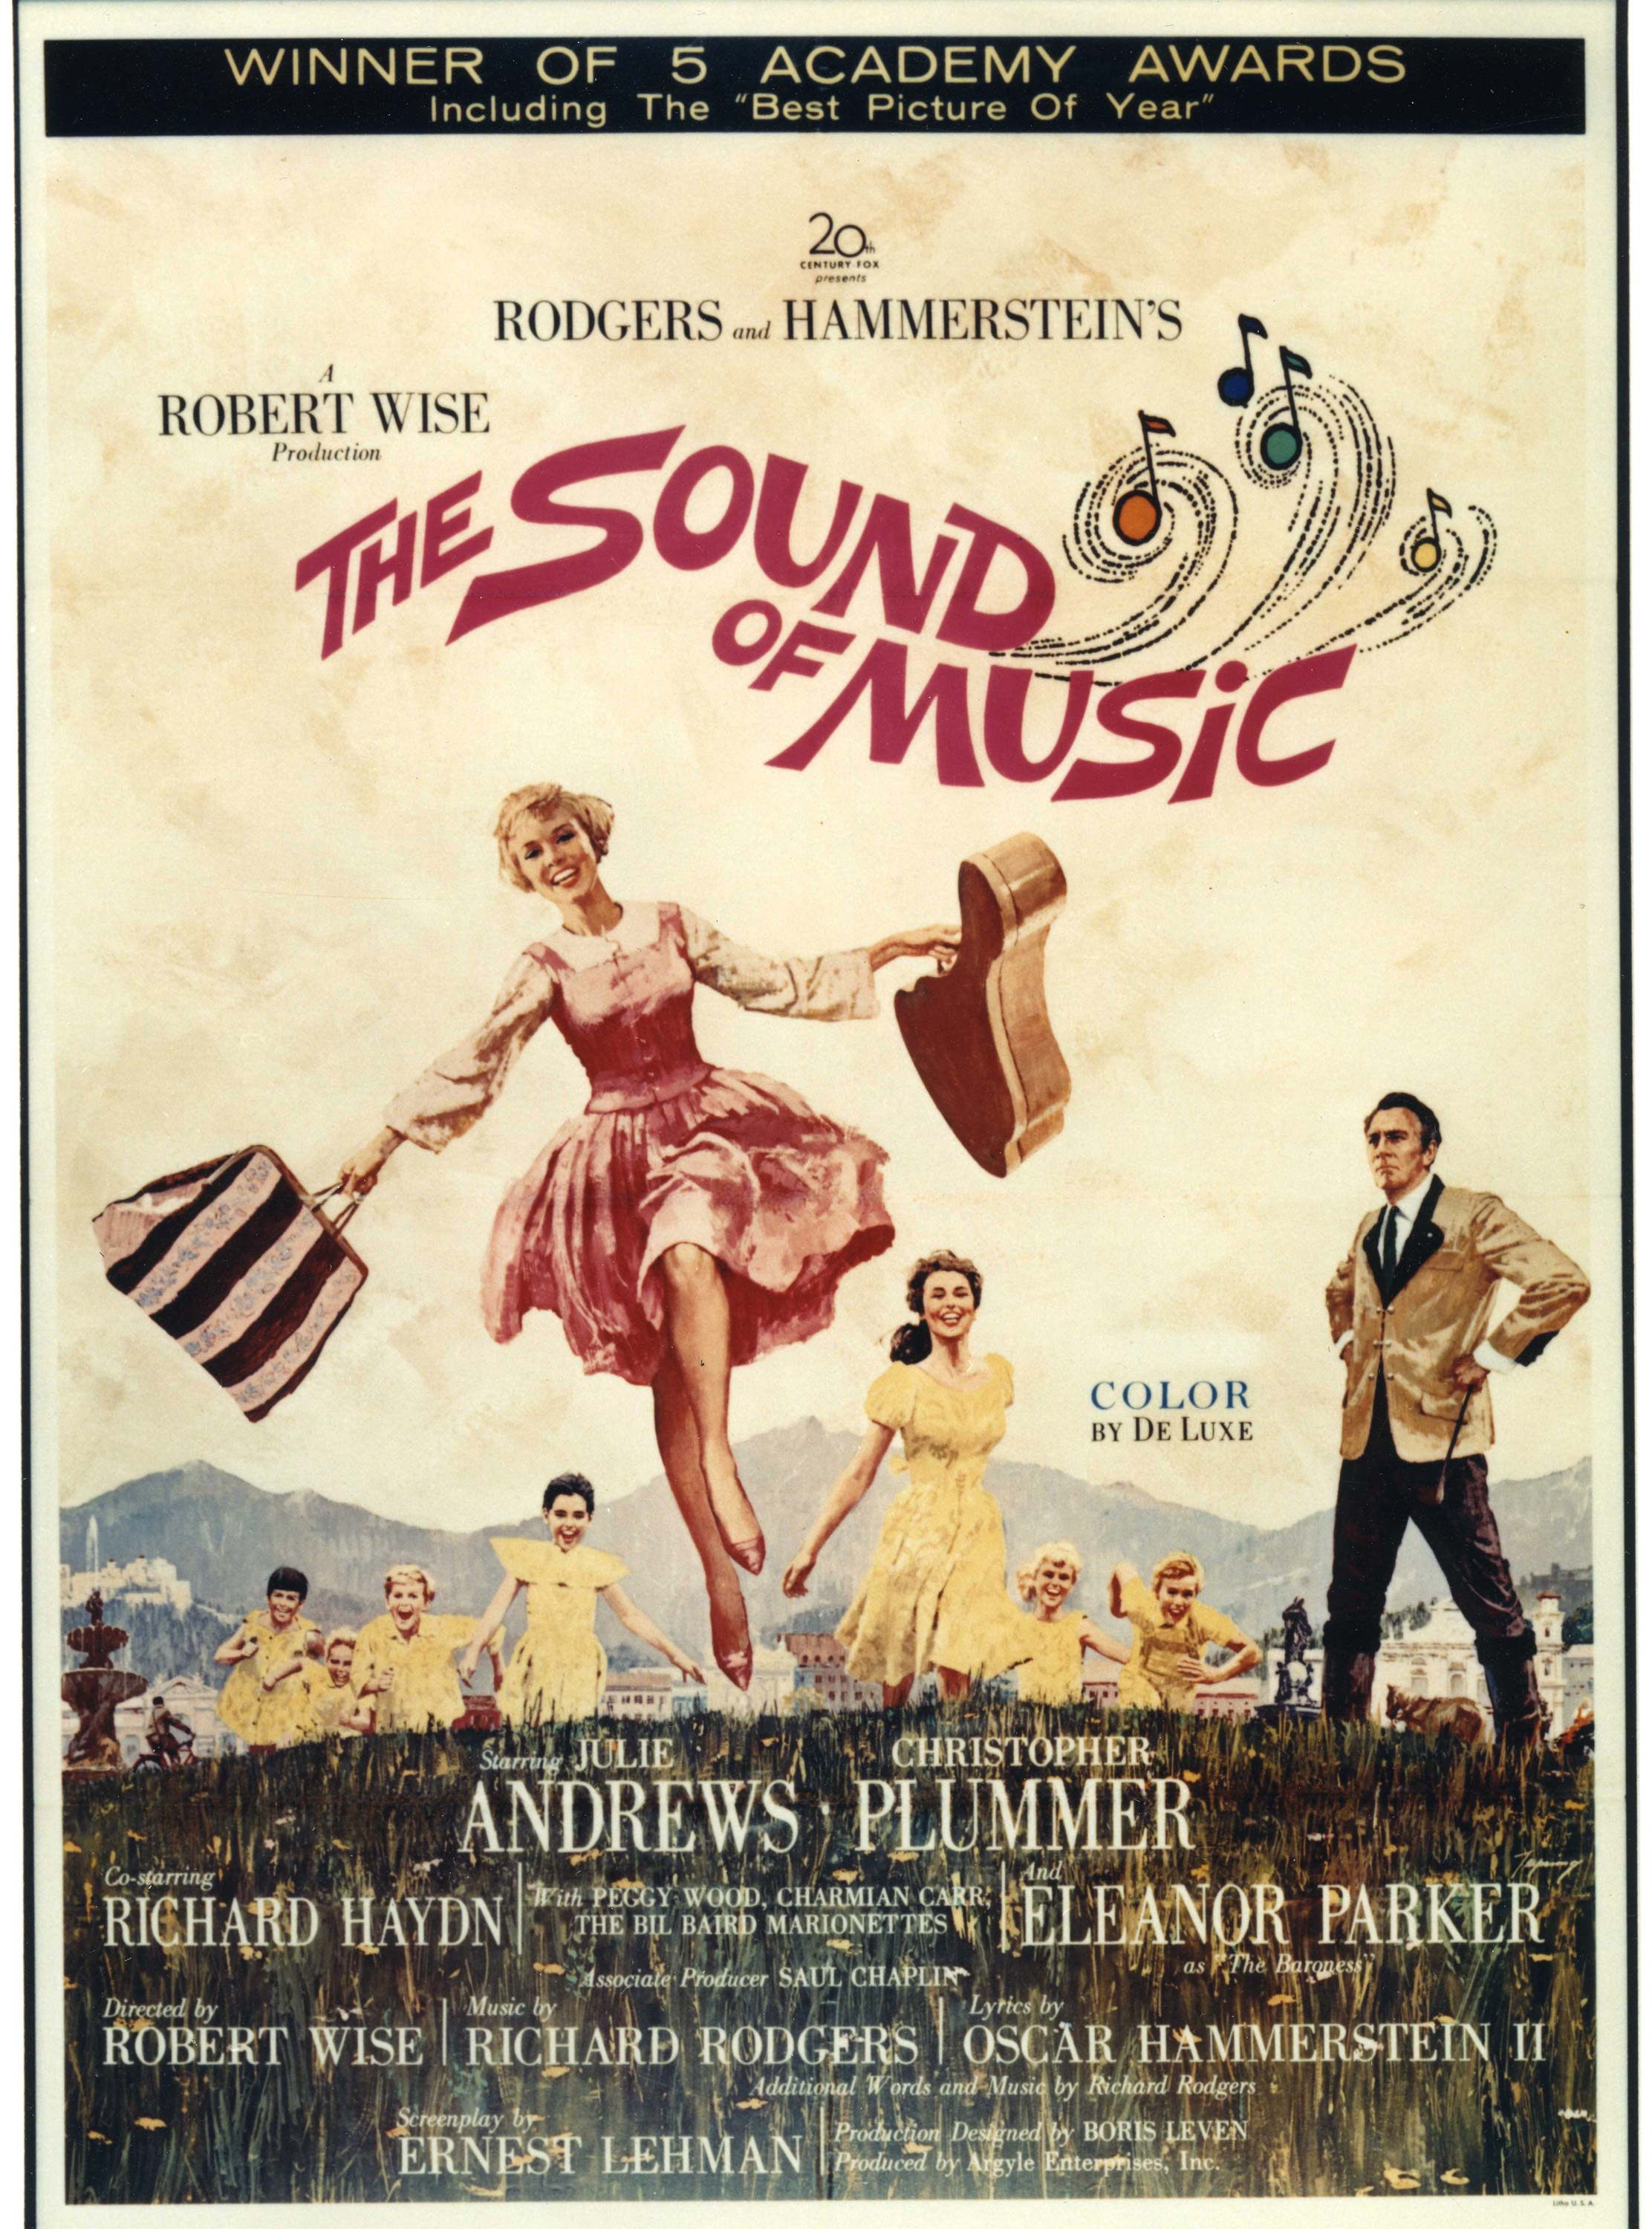 A poster for the 1965 film version of The Sound of Music.